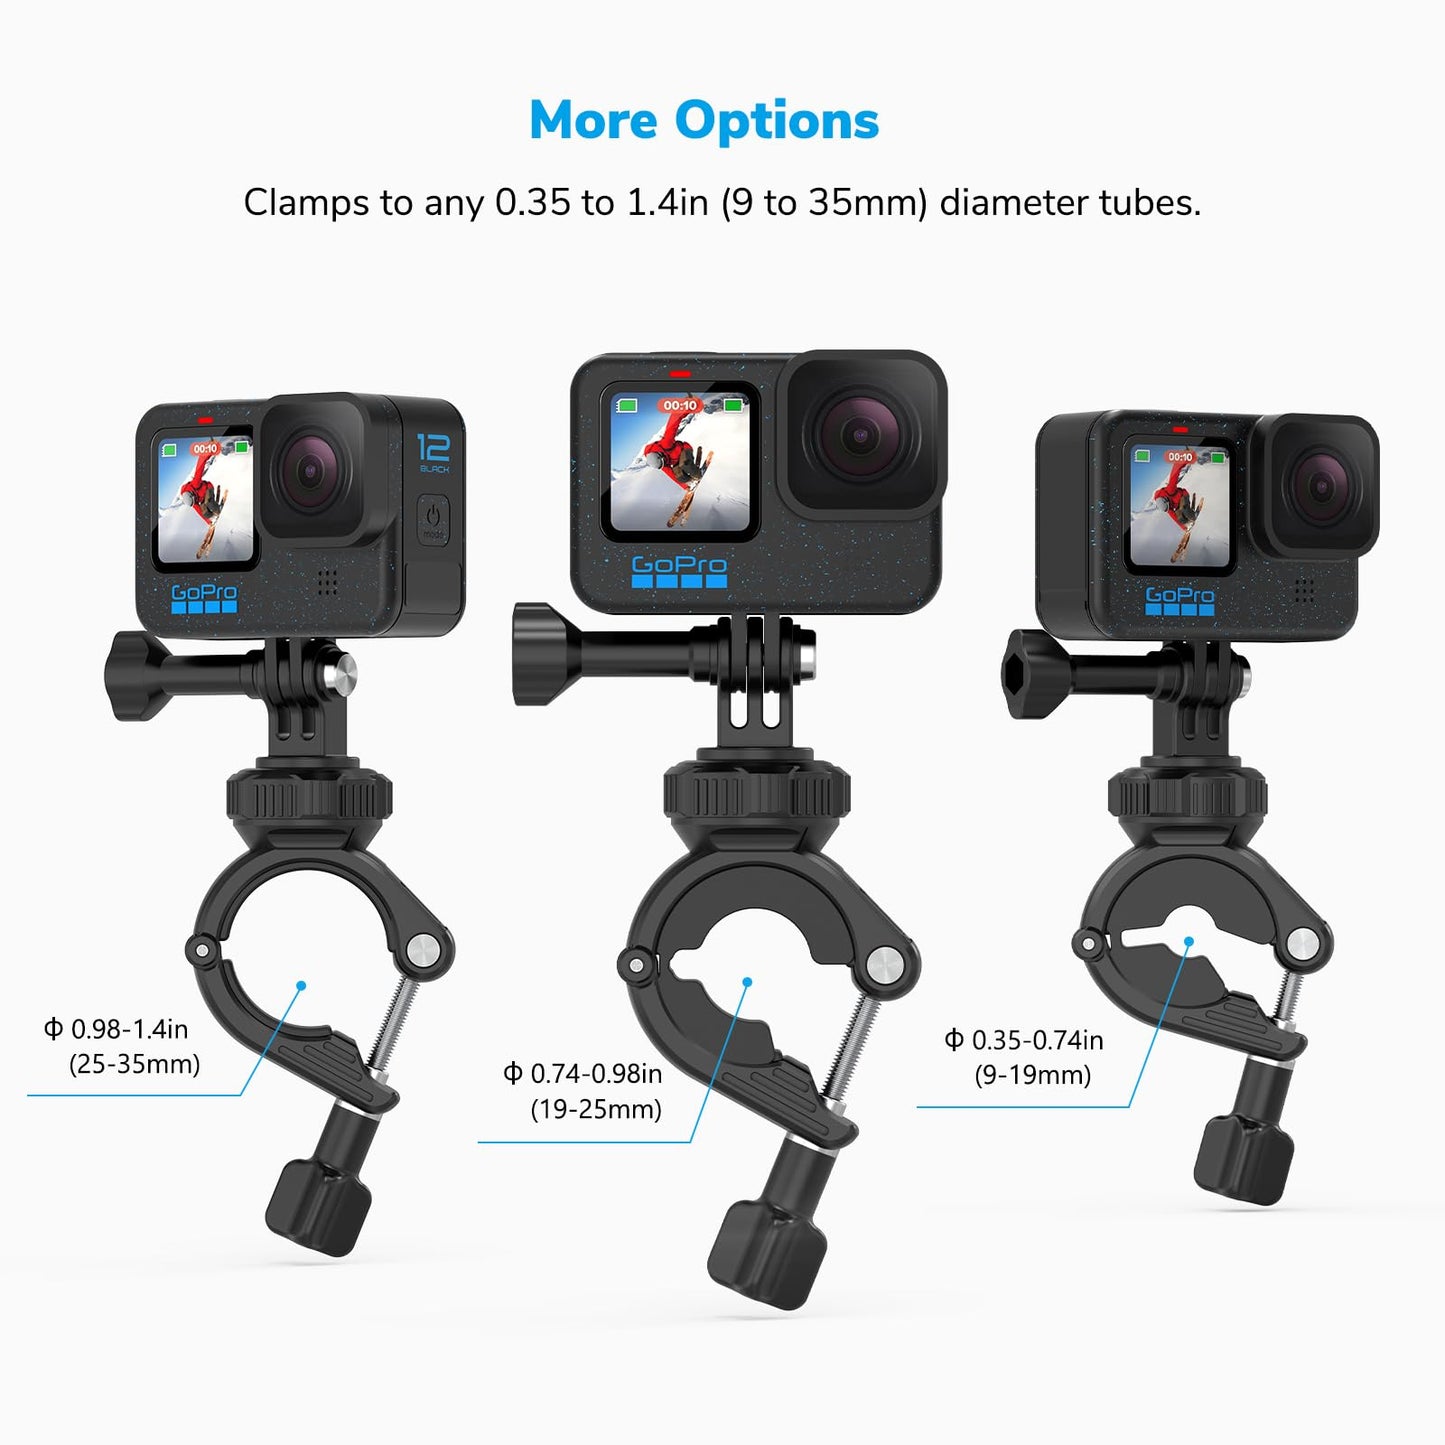 Sametop Handlebar Bike Pole Mount Motorcycle Clamp Mount Compatible with GoPro Hero 12 11 10 9 8 7 6 5 Session DJI Action Cameras - 360 Degree Rotation